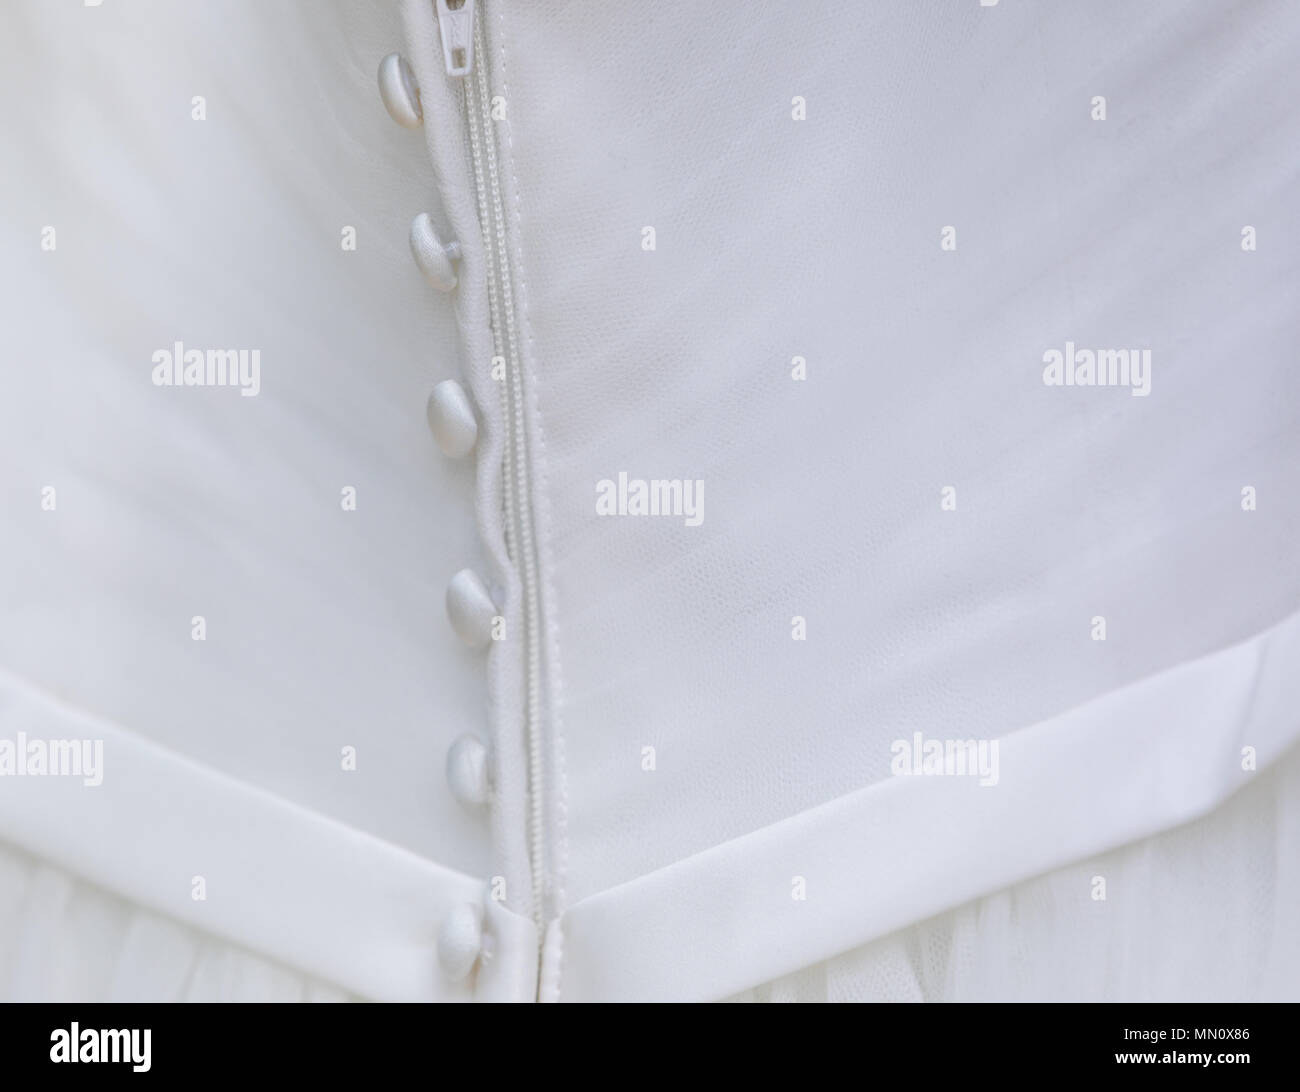 detail image of the back of a wedding dress Stock Photo